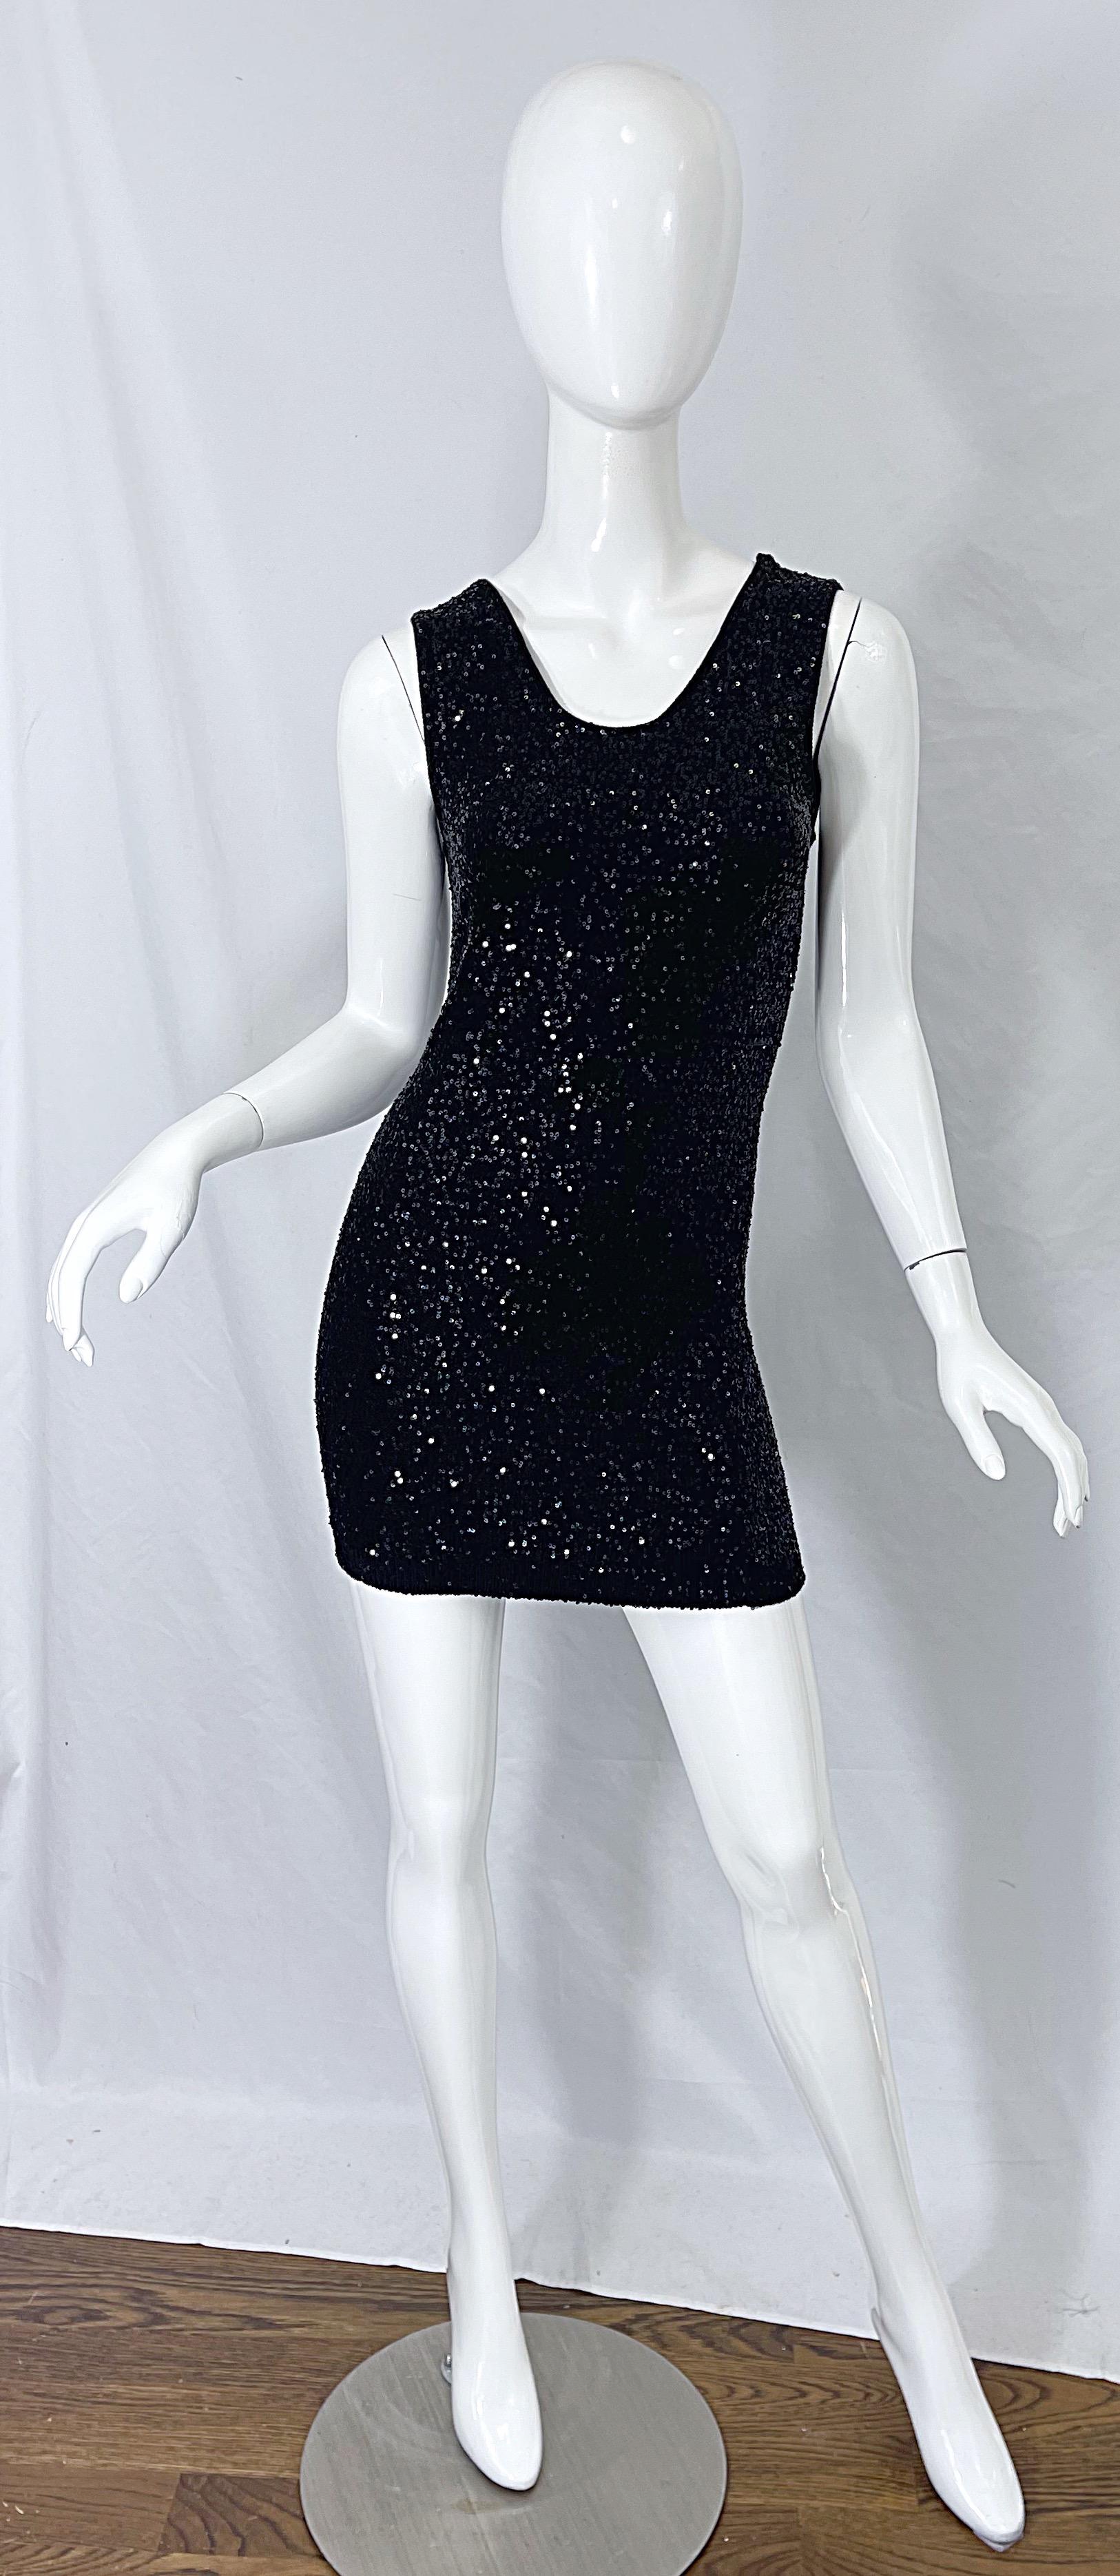 Sexy YVES SAINT LAURENT 2008 black sequin mini sweater dress ! Features thousands of hand-sewn black sequins over the entire dress. Simply slips over the head. Plunging back reveals just the right amount of skin. 
Great with heels or boots
In great